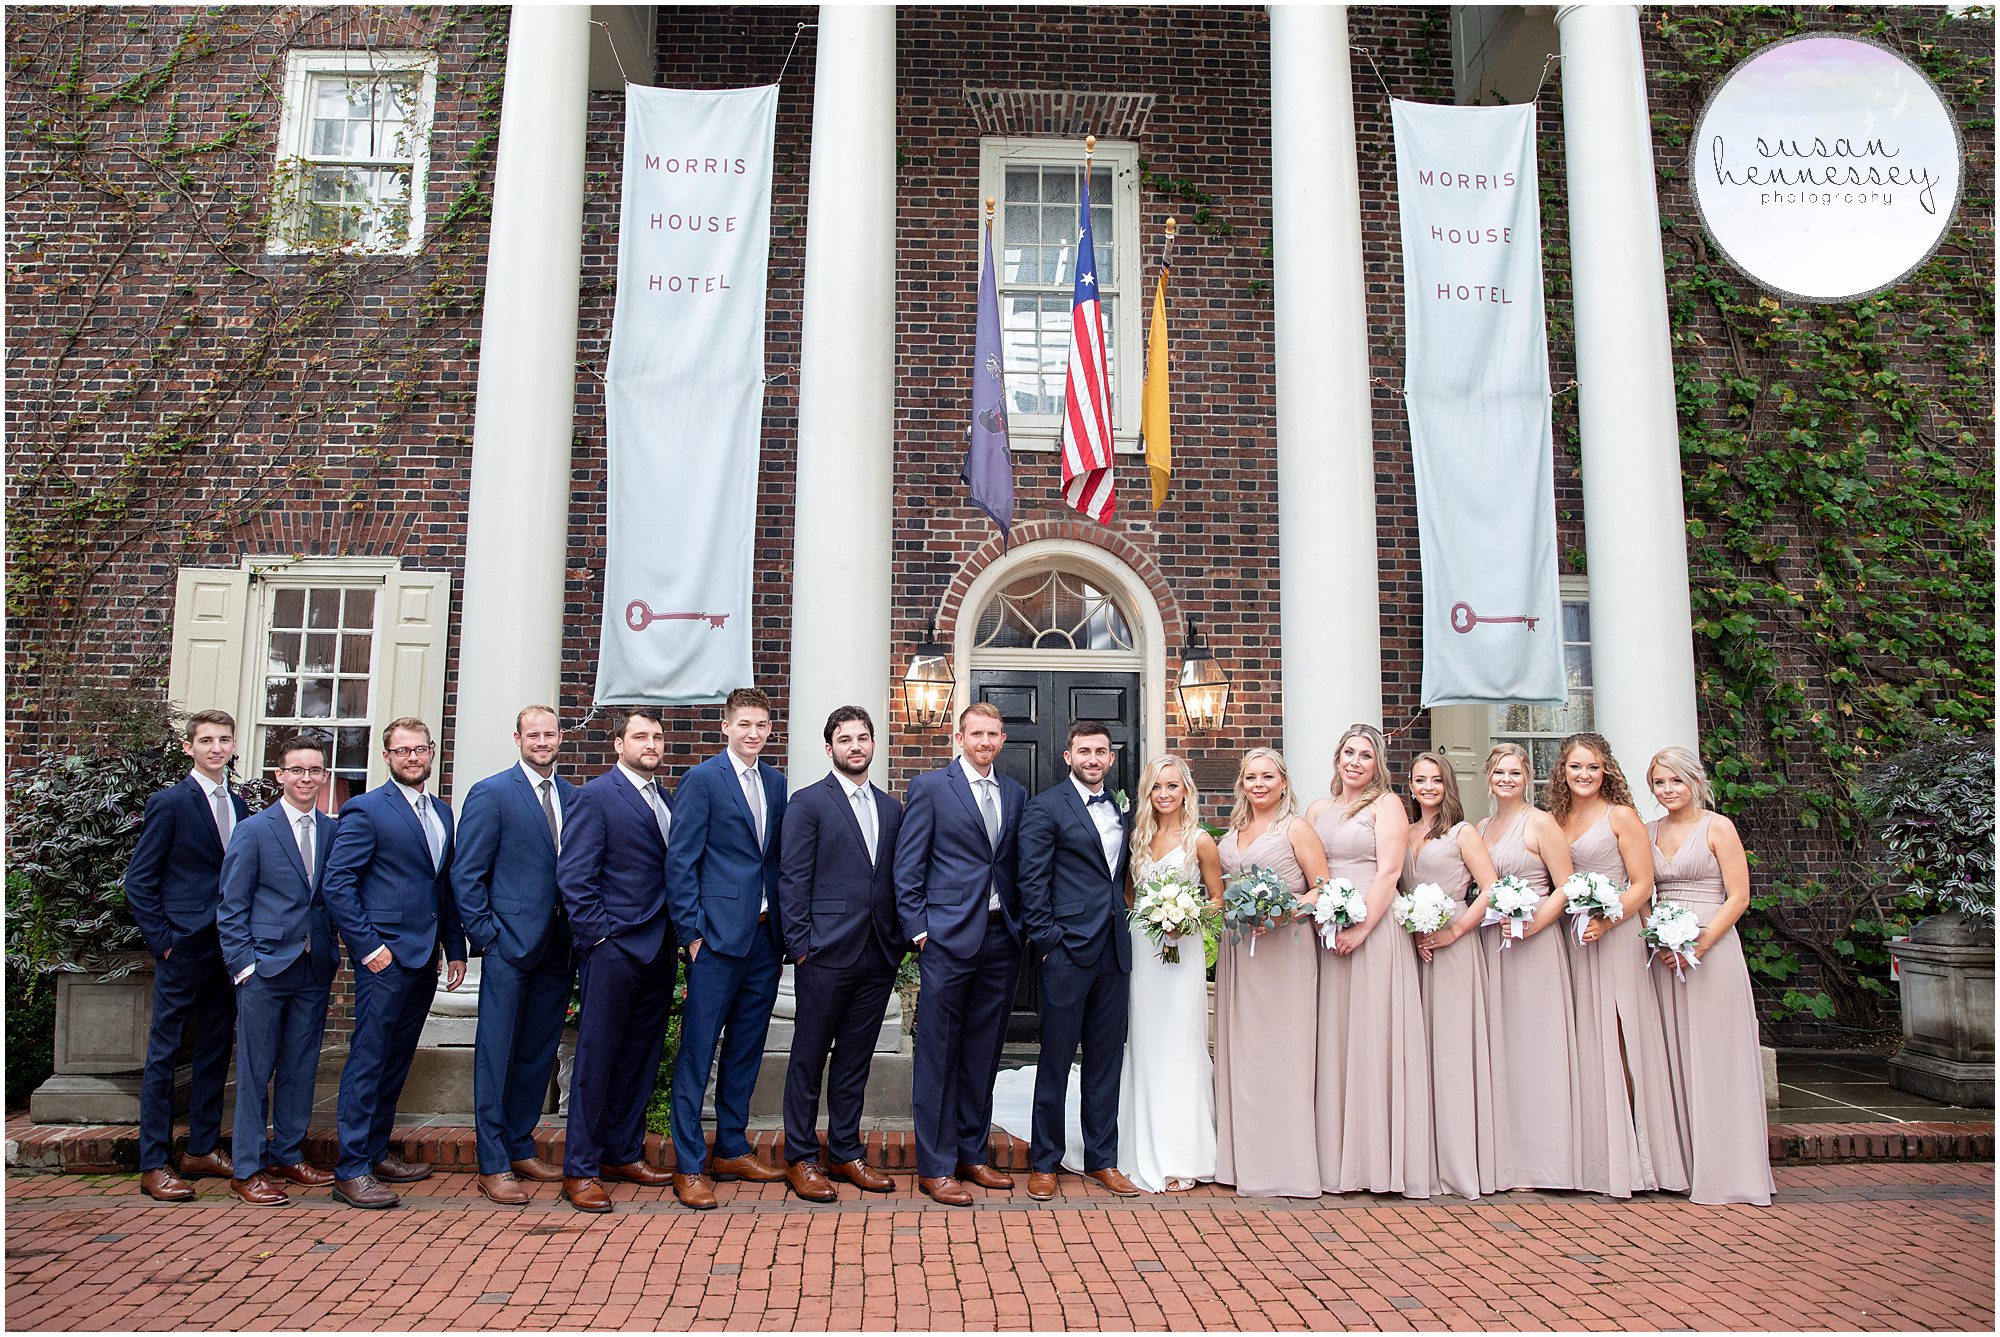 Bridal party portraits at Philly wedding